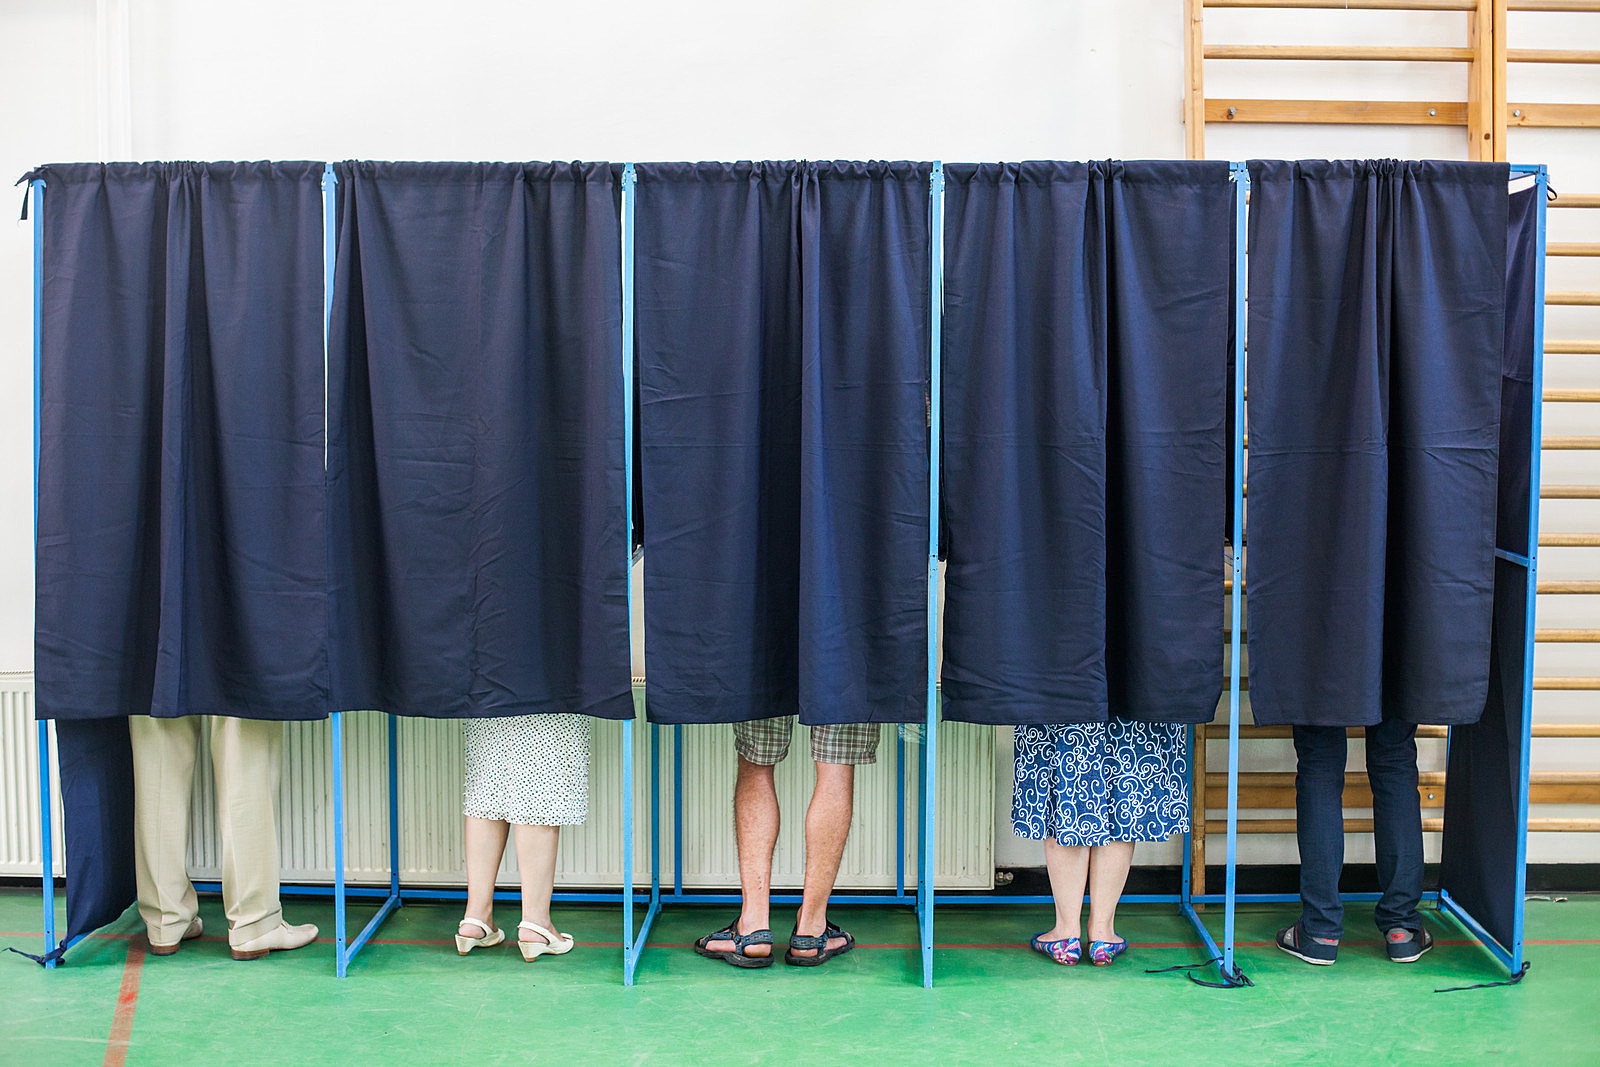 Color image of some people voting in some polling booths at a voting station.